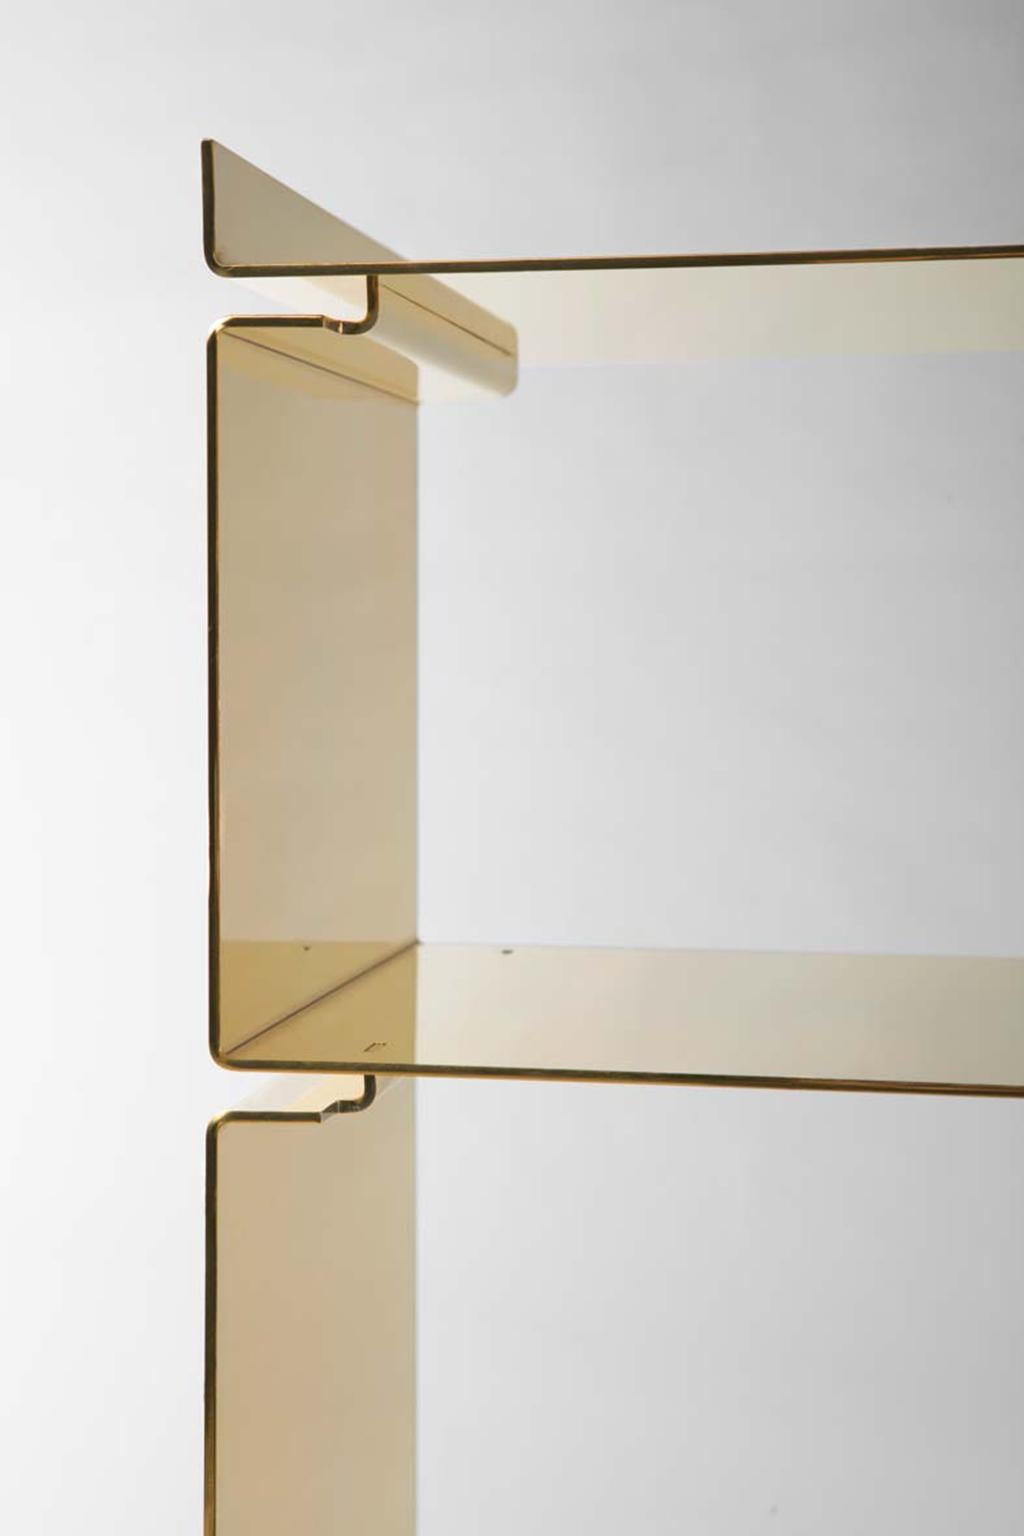 SEM Gold collection, modular bookshelf of interlocking steel elements plated in 24-karat polished yellow gold. Elements measurement: (35/30/25/18 cm).The Gold collection has a range of exemplary pieces that echo the past yet embrace the features of